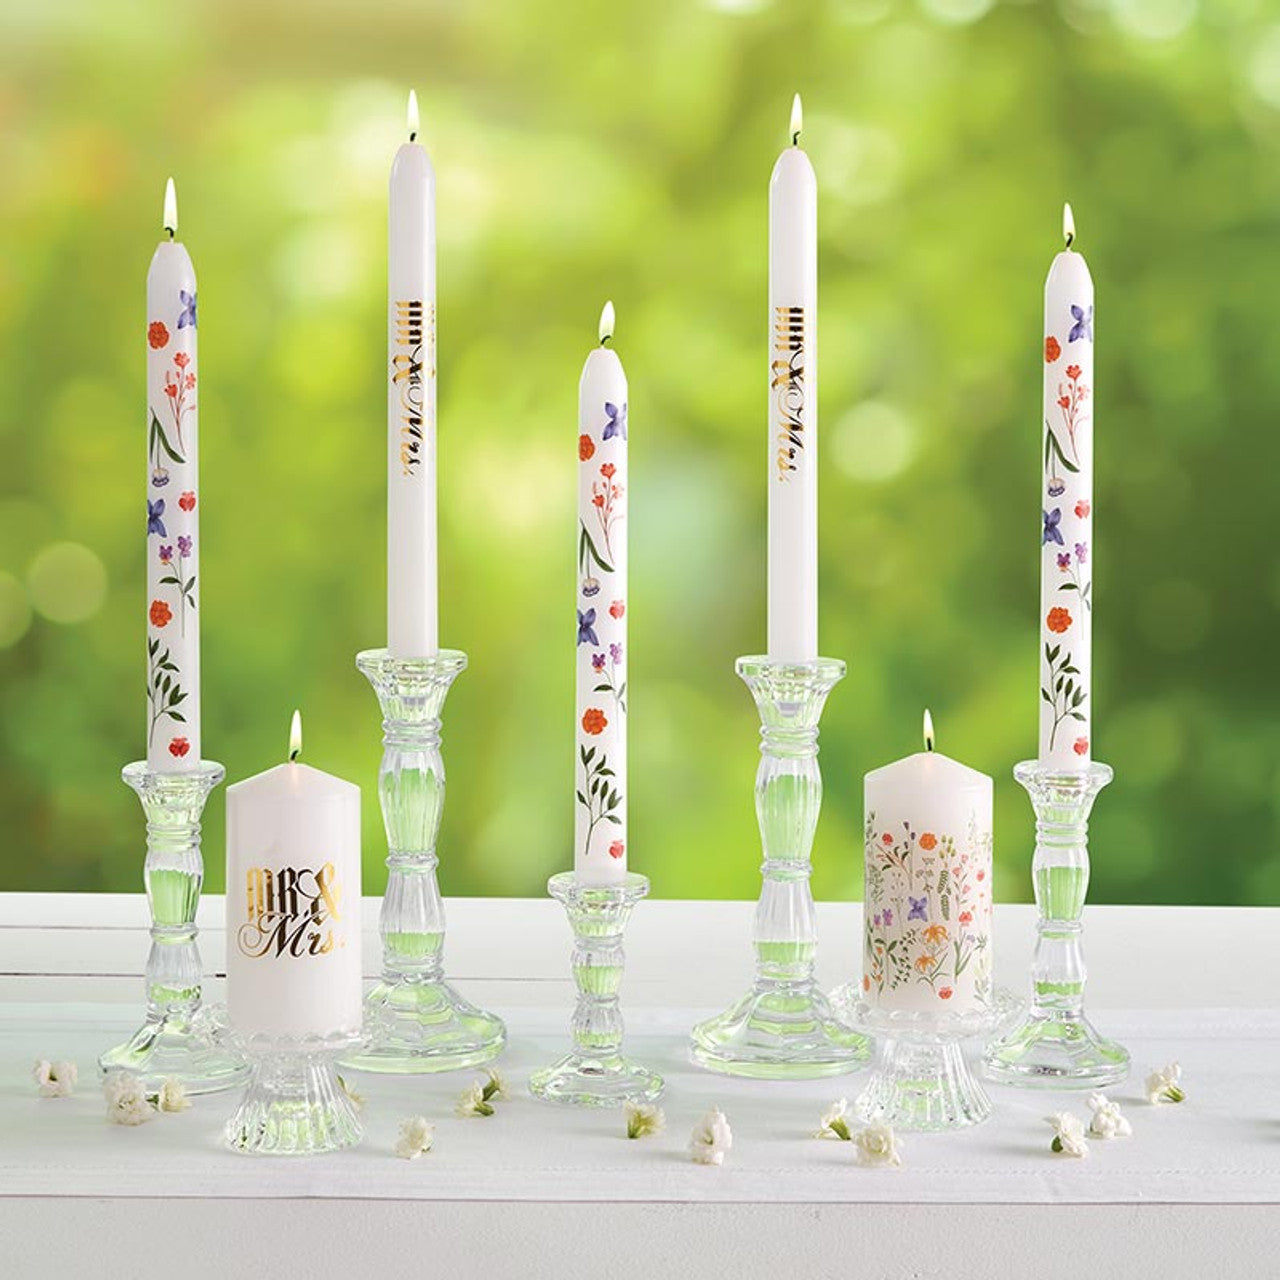 Boho Flowers Mini Pillar Candle | Aesthetic Unscented Table Decor Floral Cylindrical Candle 4.75"